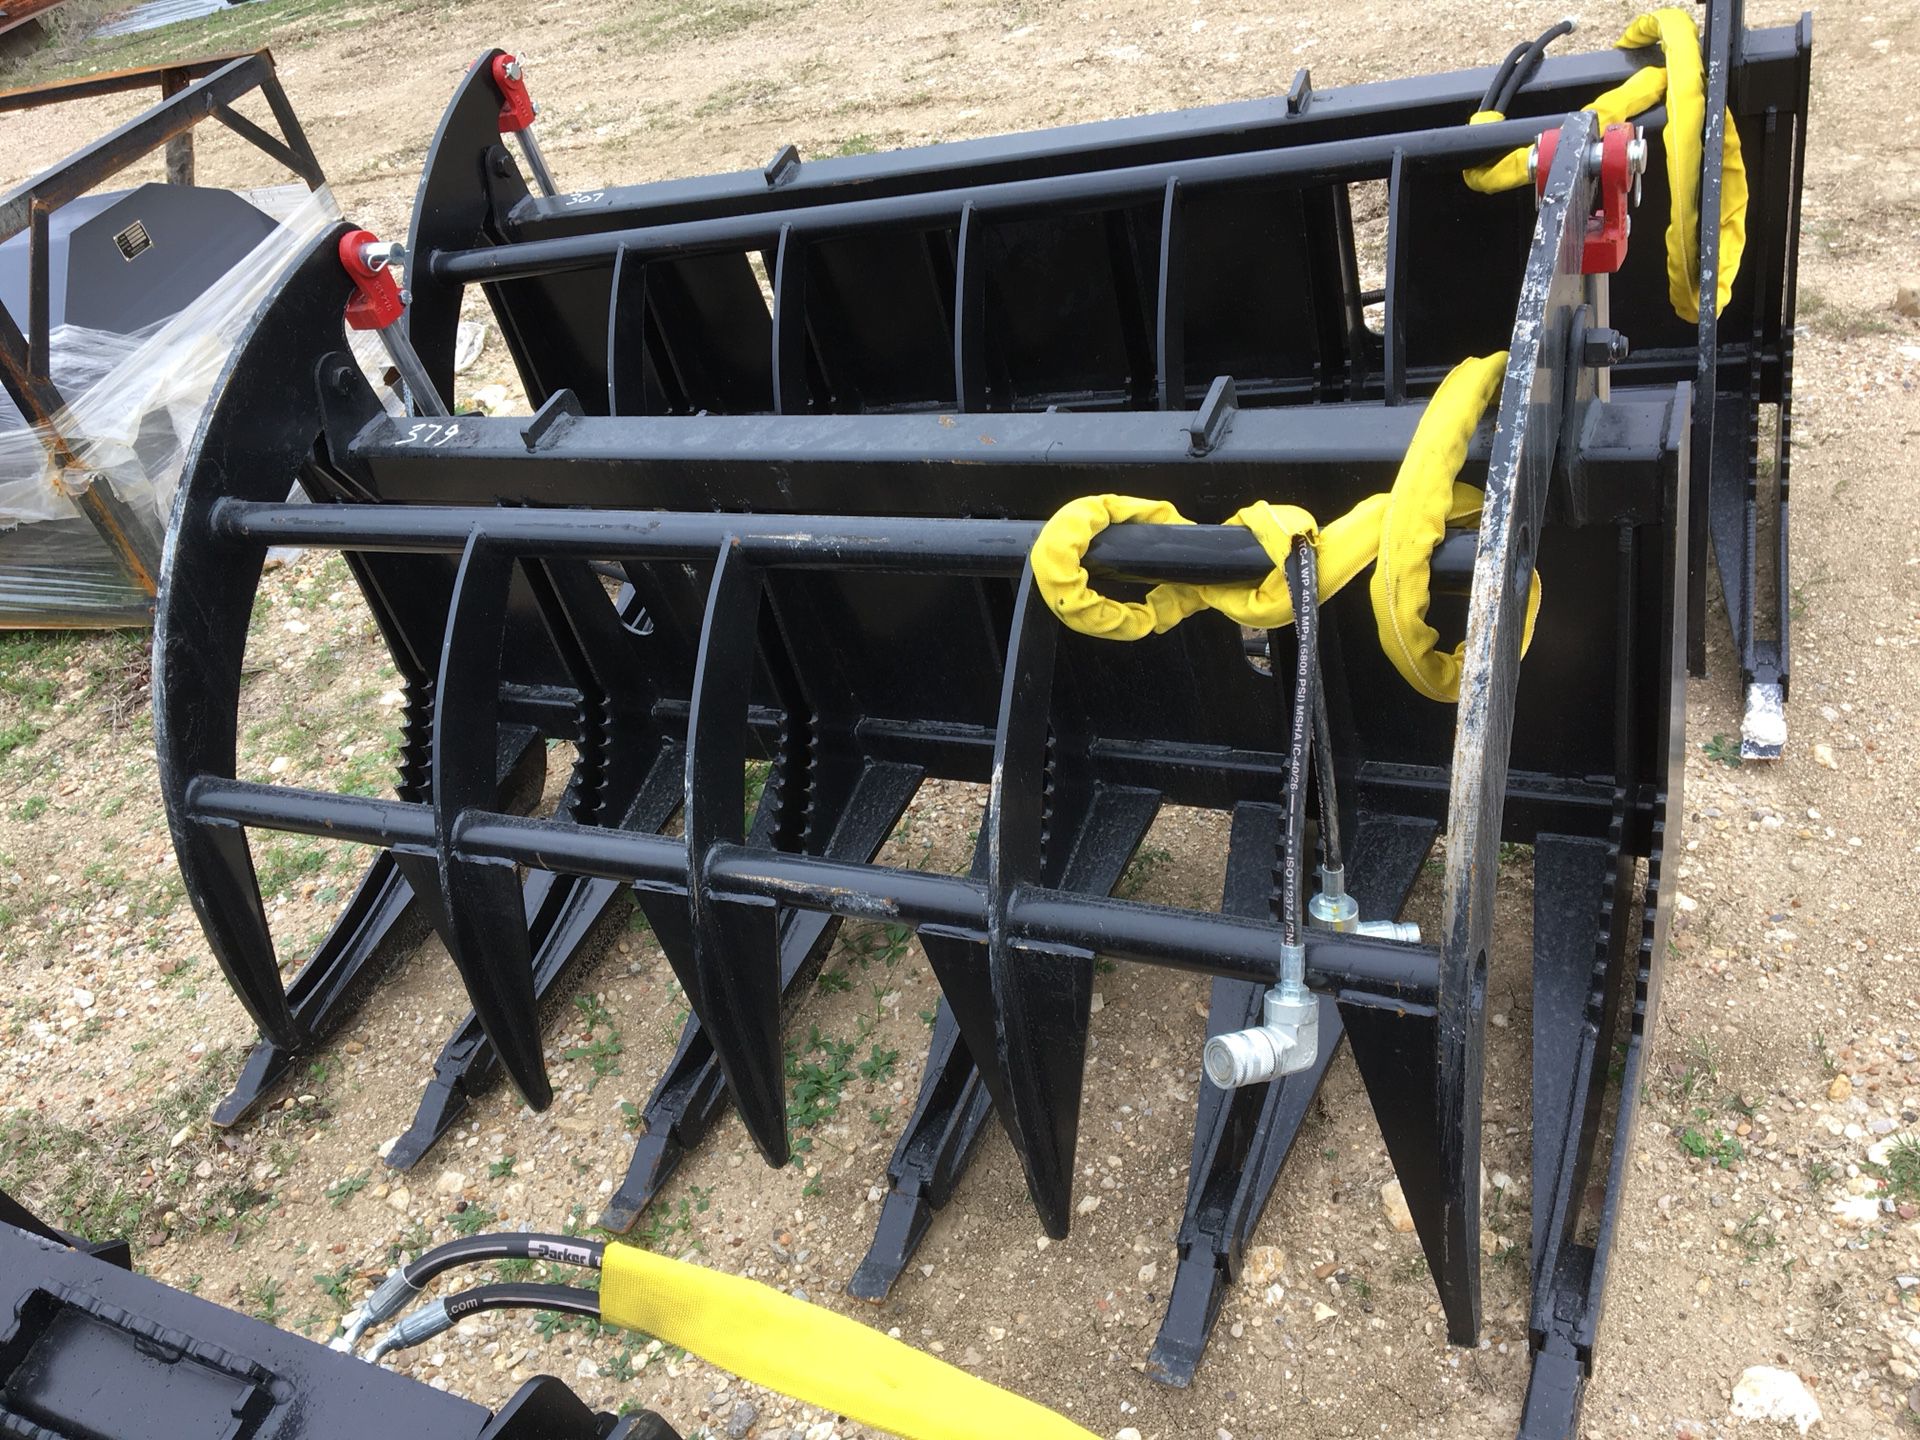 66” Skid Steer Root Rake or Root Grapple made in USA $995 ea . We also have many other skid steer attachments available in stock . We location in For